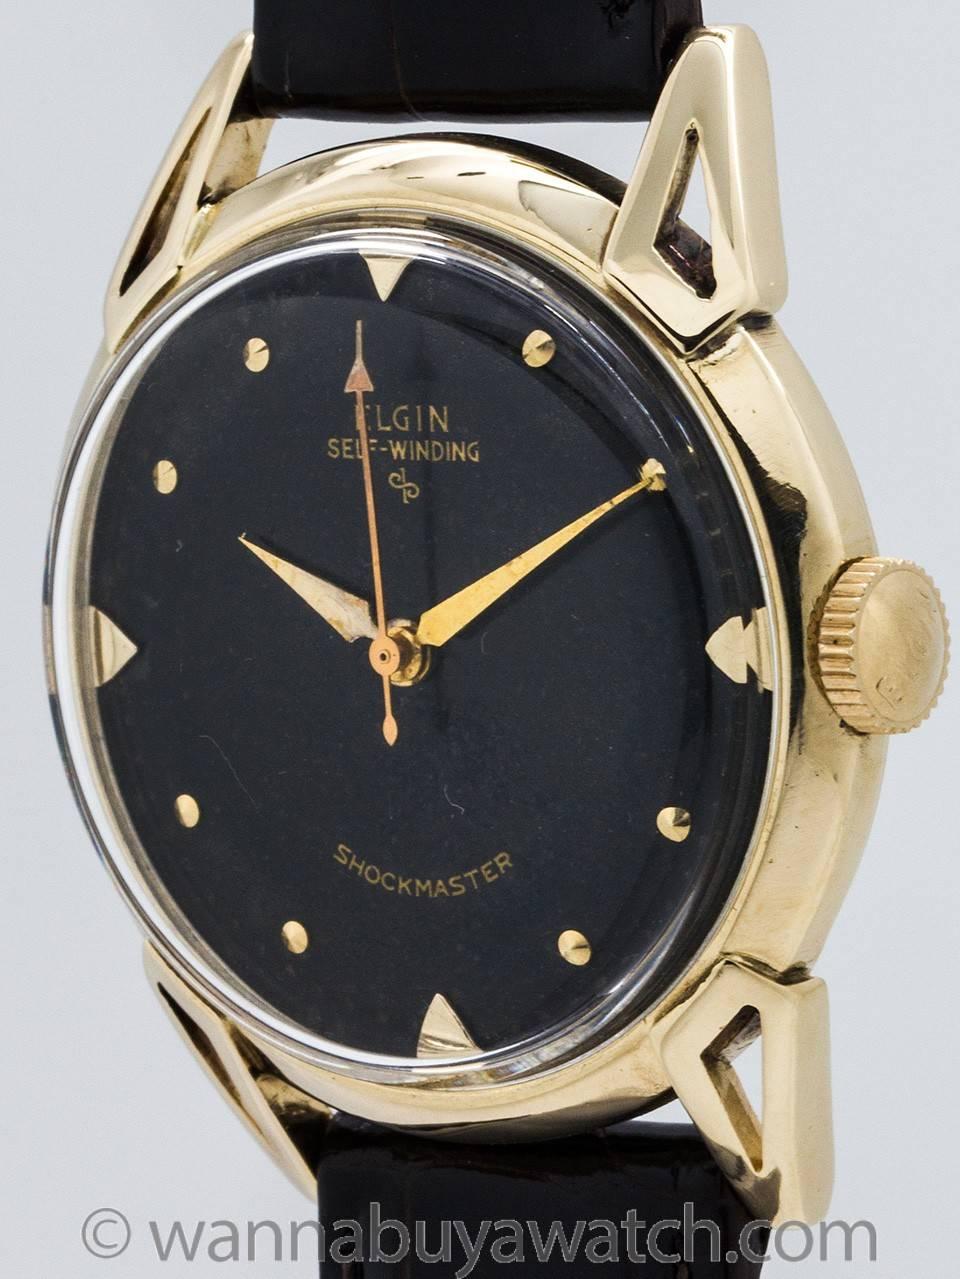 Man’s vintage Elgin 14K gold self winding wristwatch with black original dial circa 1950’s. Featuring 34 x 40mm case with extended horn lugs, acrylic crystal, and very pleasing original black gloss dial with applied gold indexes and tapered gilt